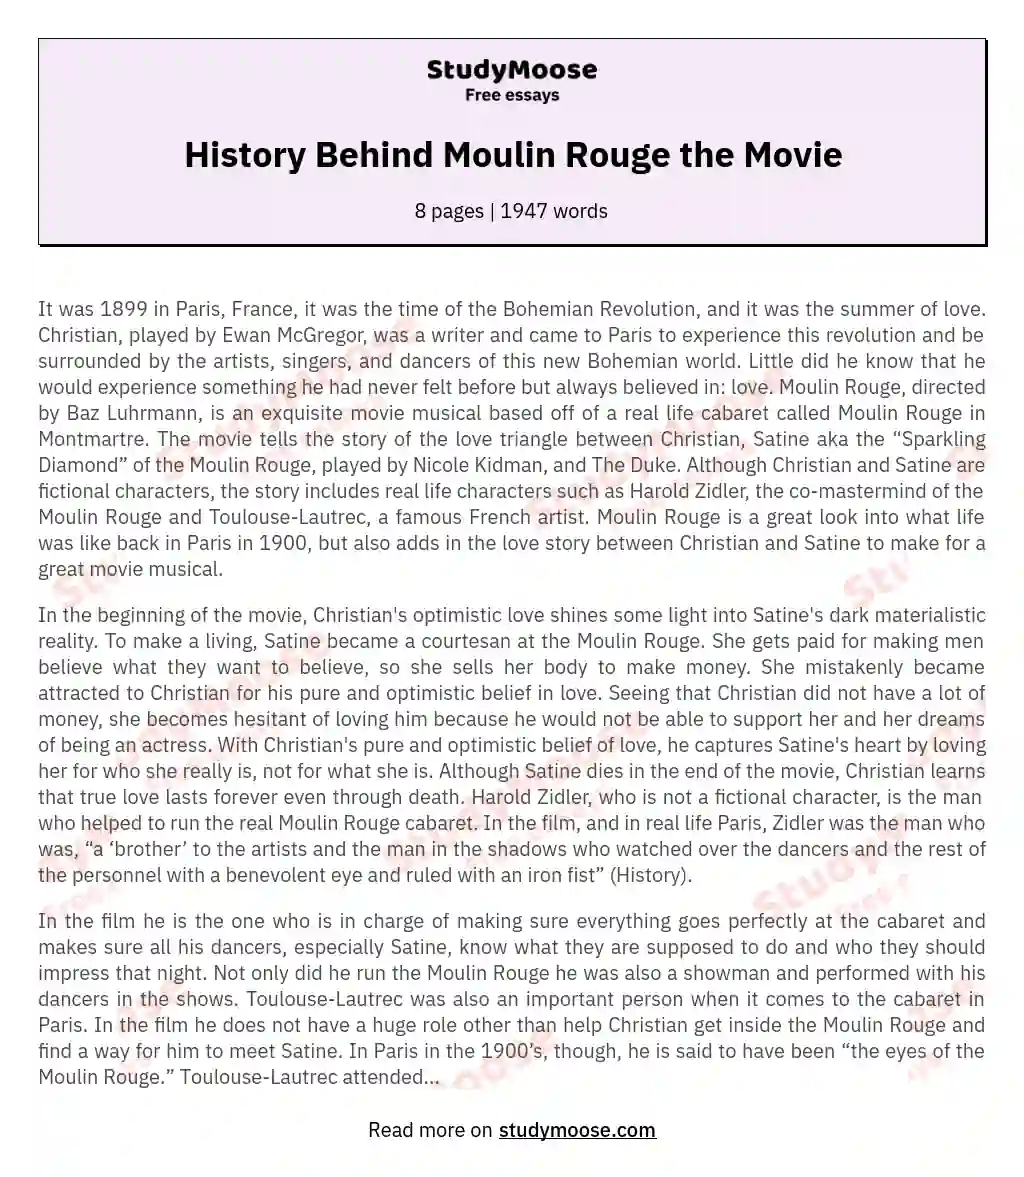 History Behind Moulin Rouge the Movie essay